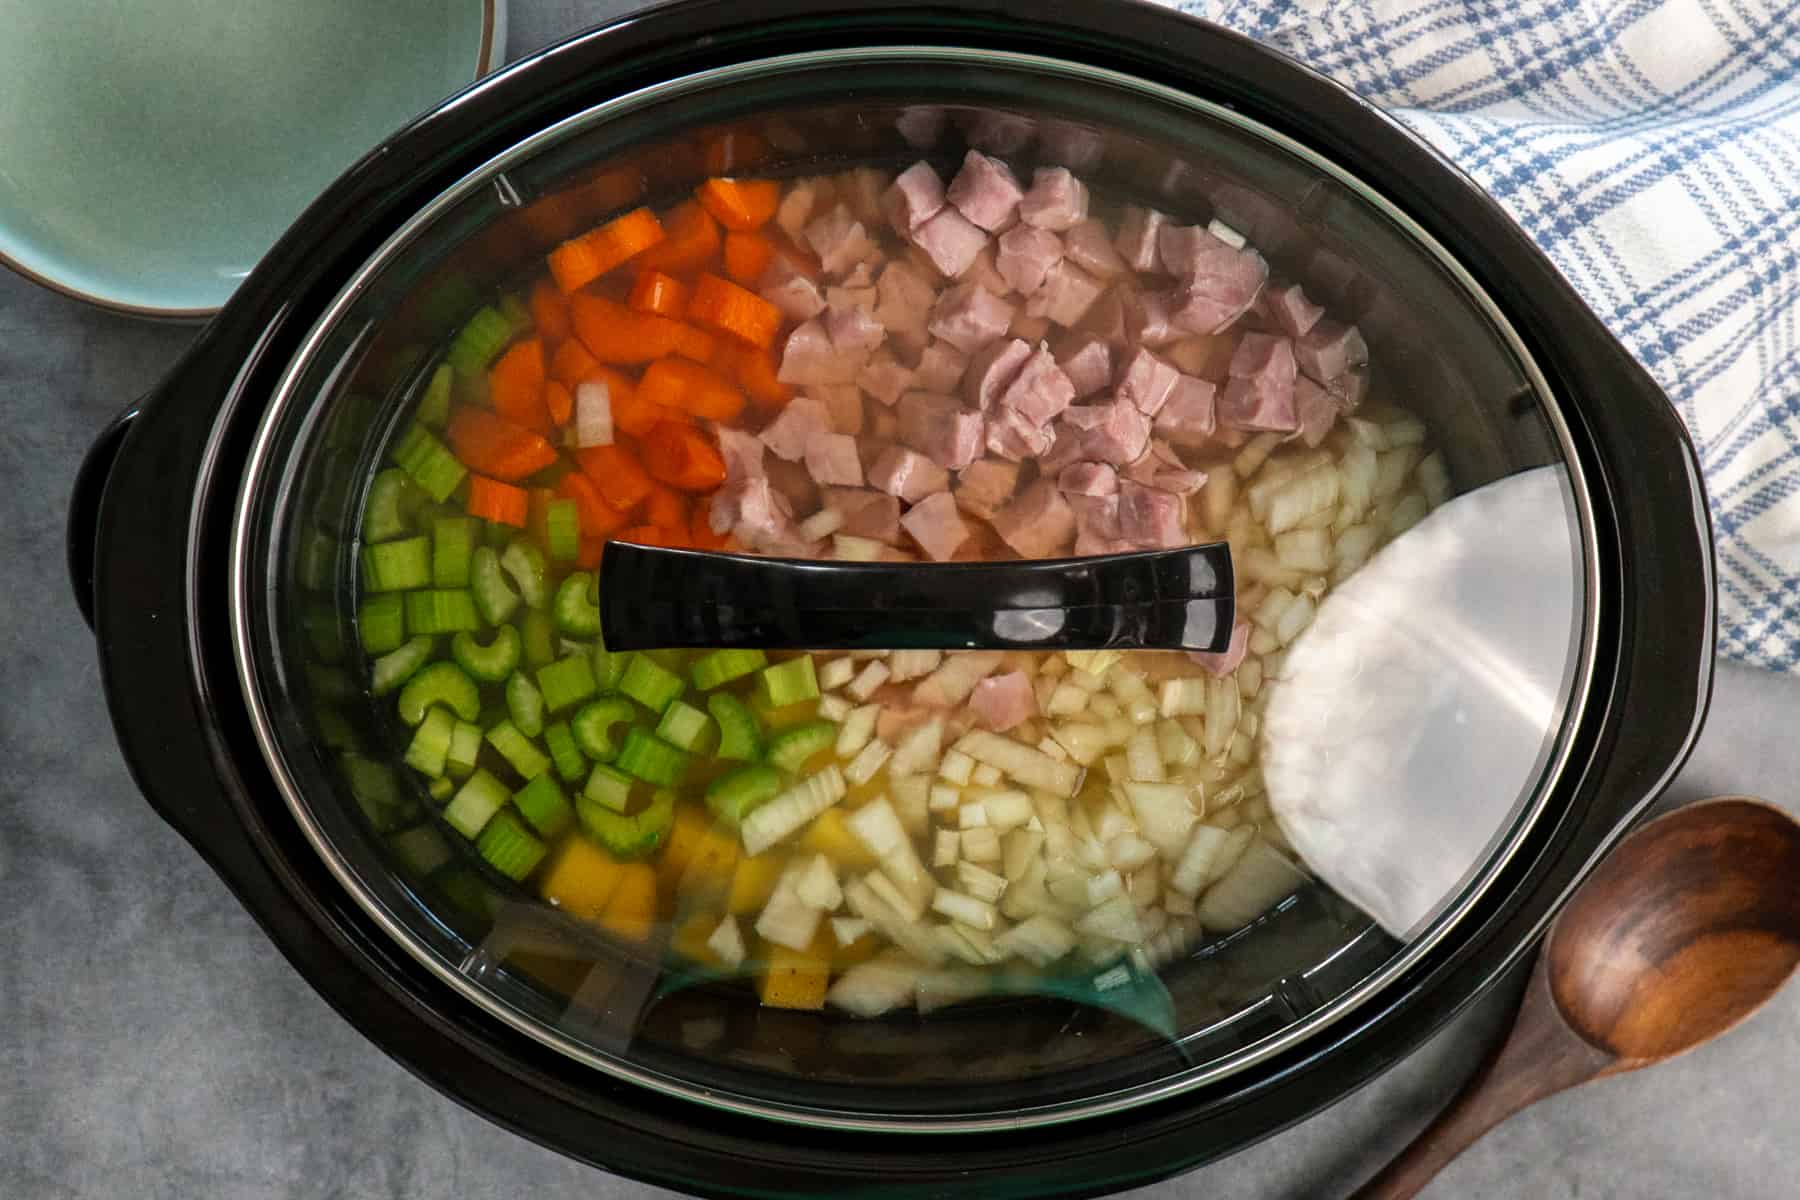 Ham and veggies in a crock pot with the lid on it.